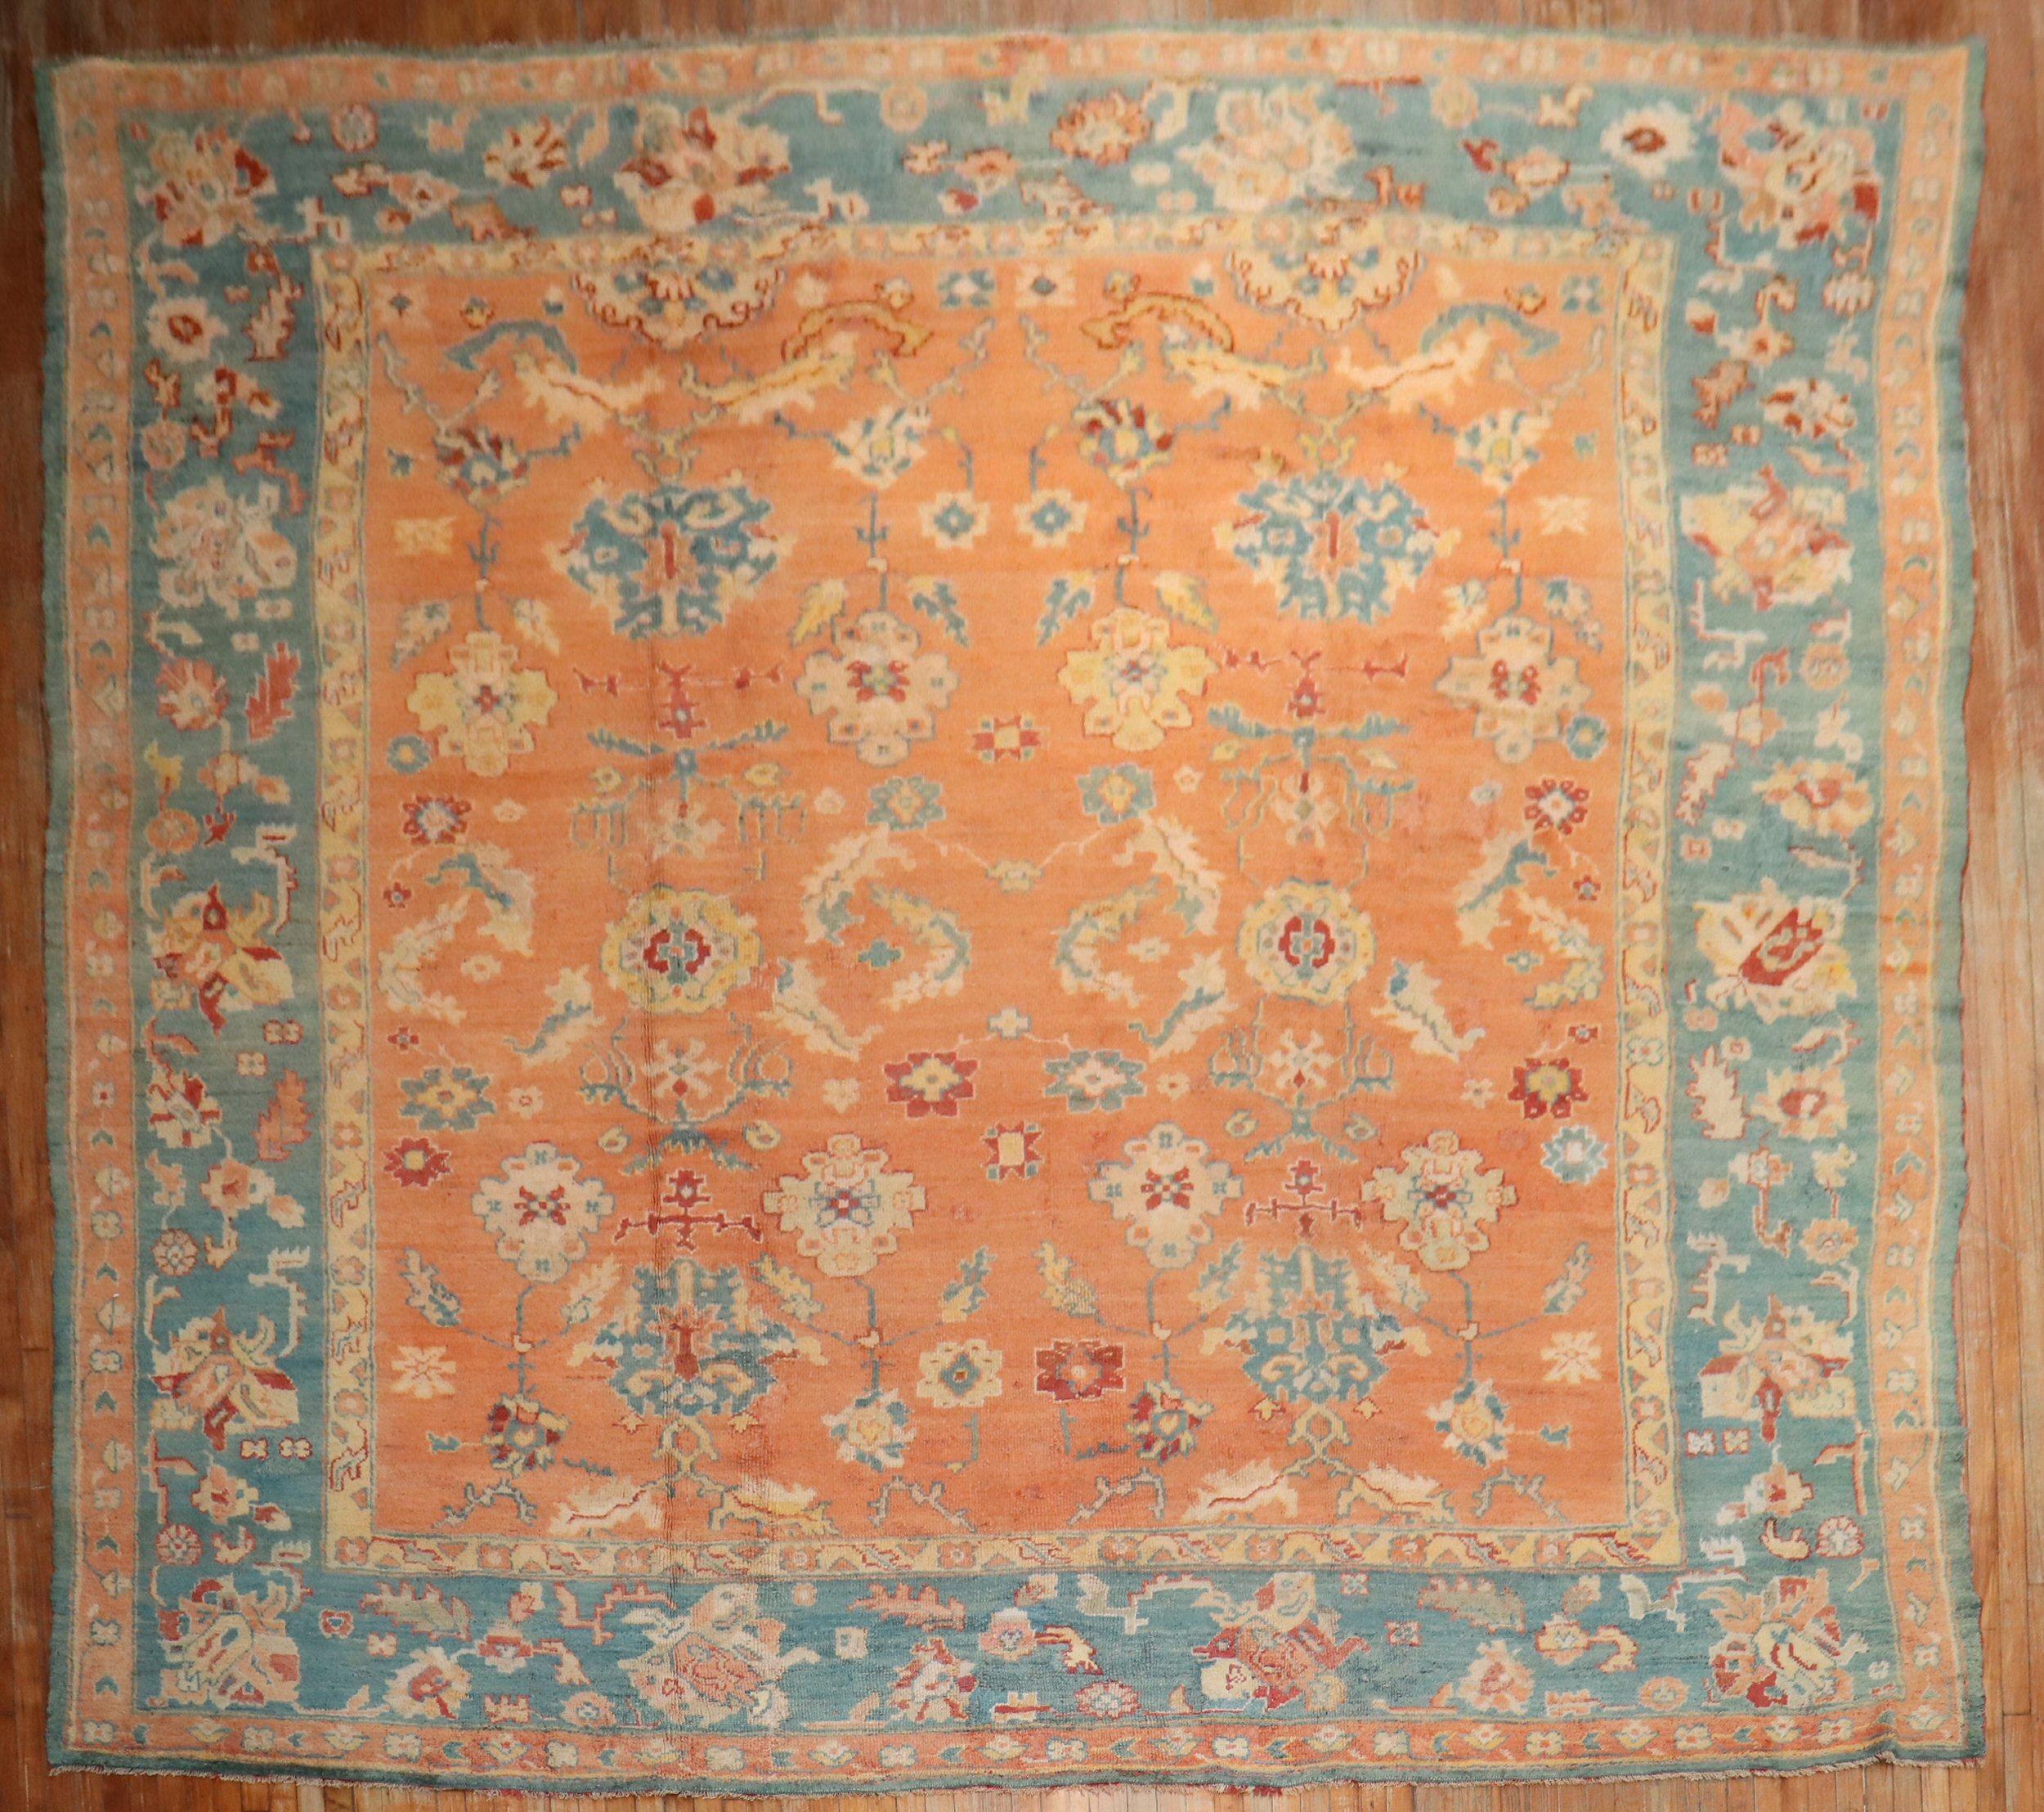 An early 20th century antique Oushak rugfeaturing a pumpkin orange field and teal border

Measures: 12'10” x 14'6”.